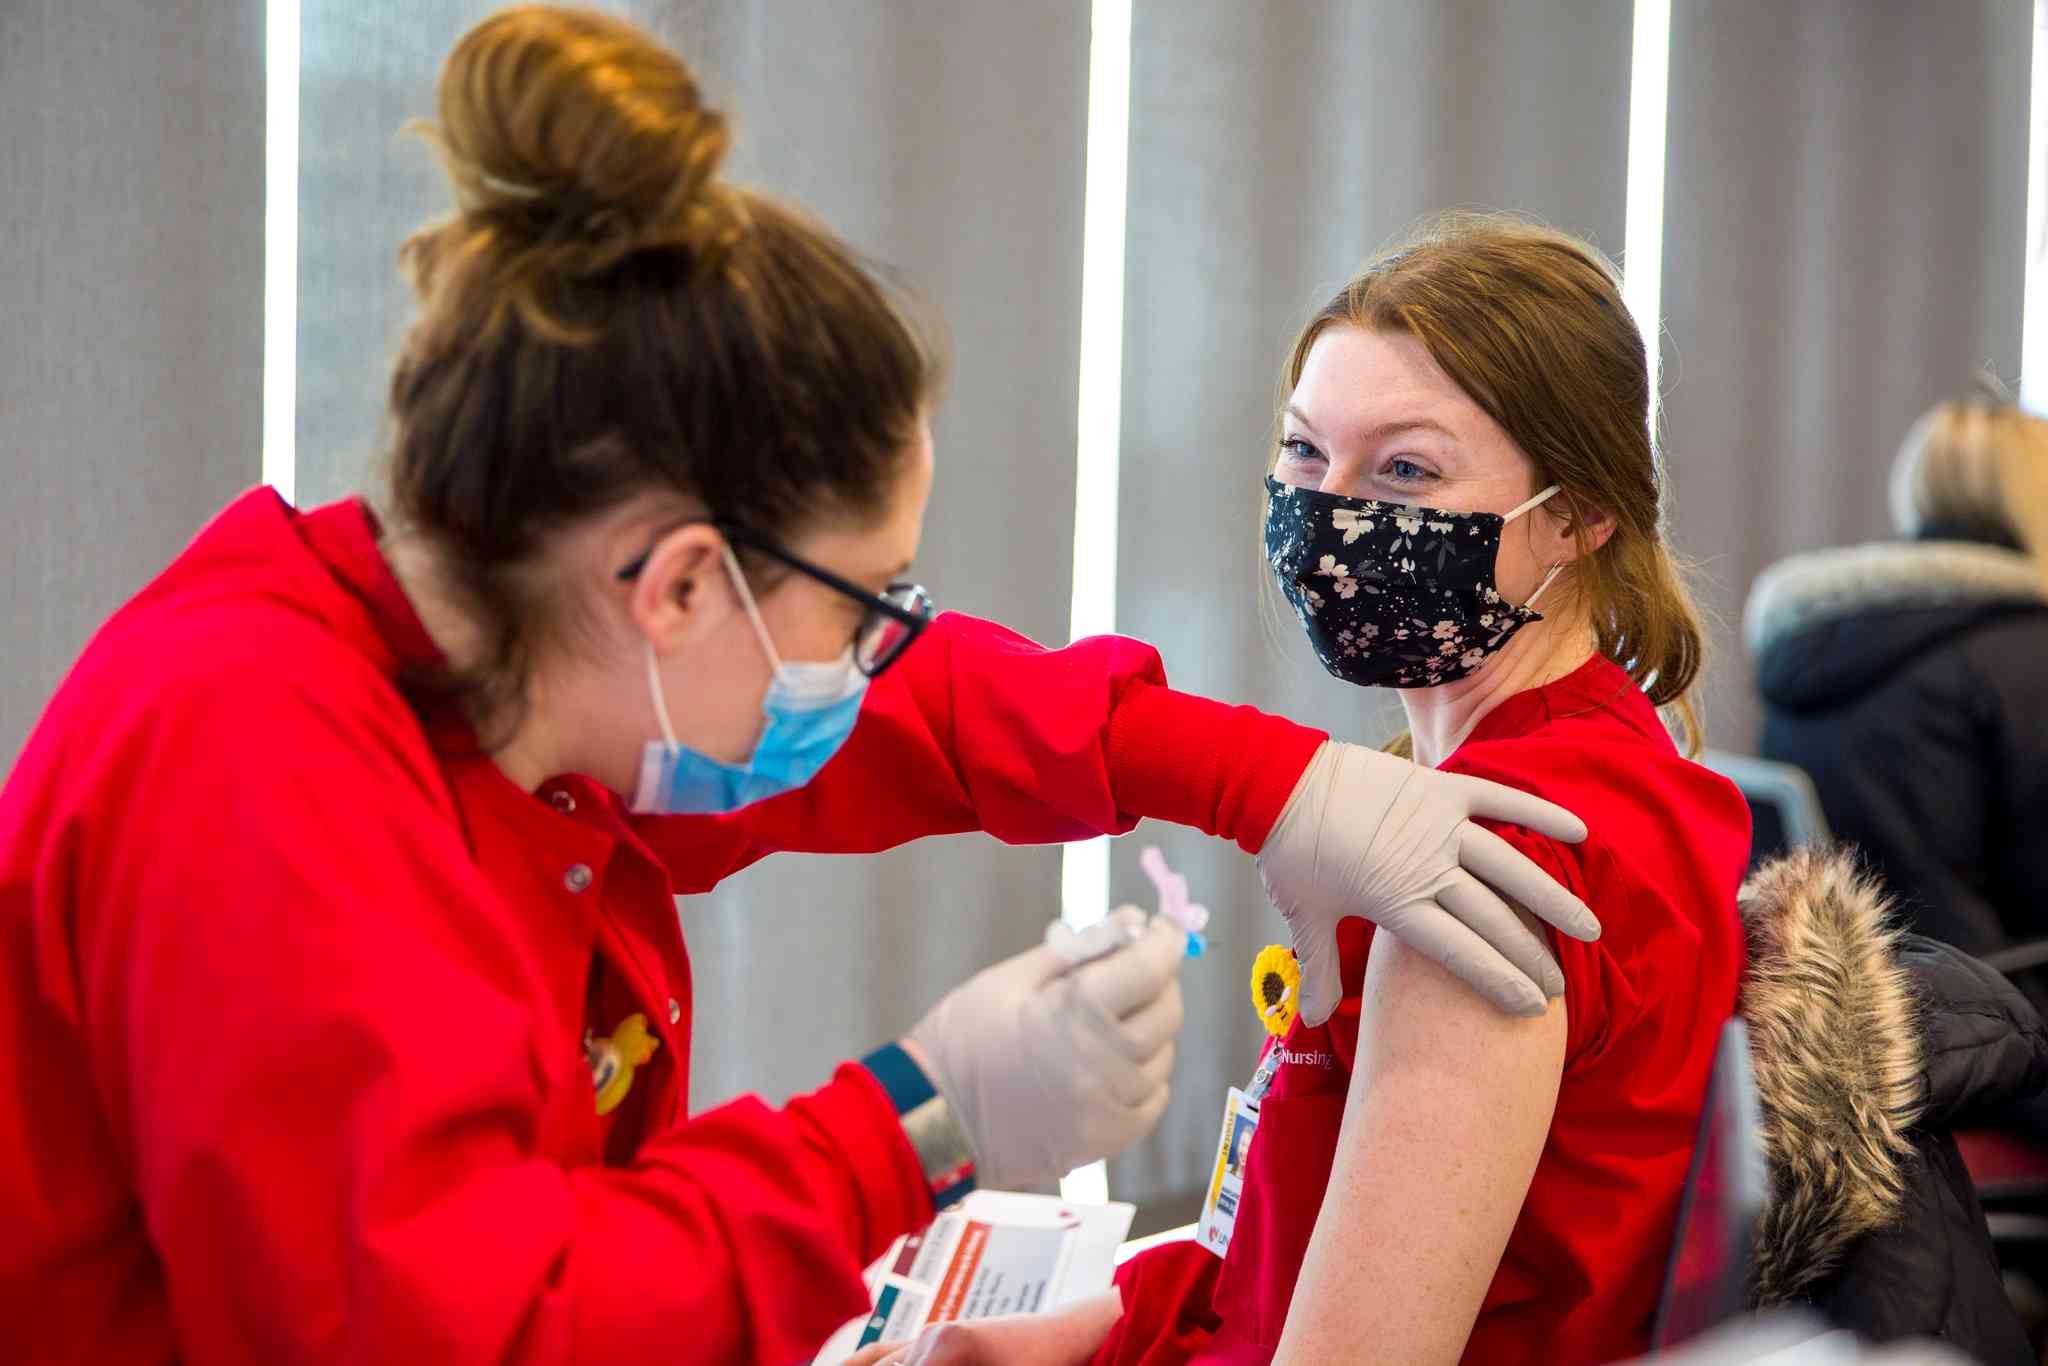 A UNMC student receives their COVID-19 vaccine.